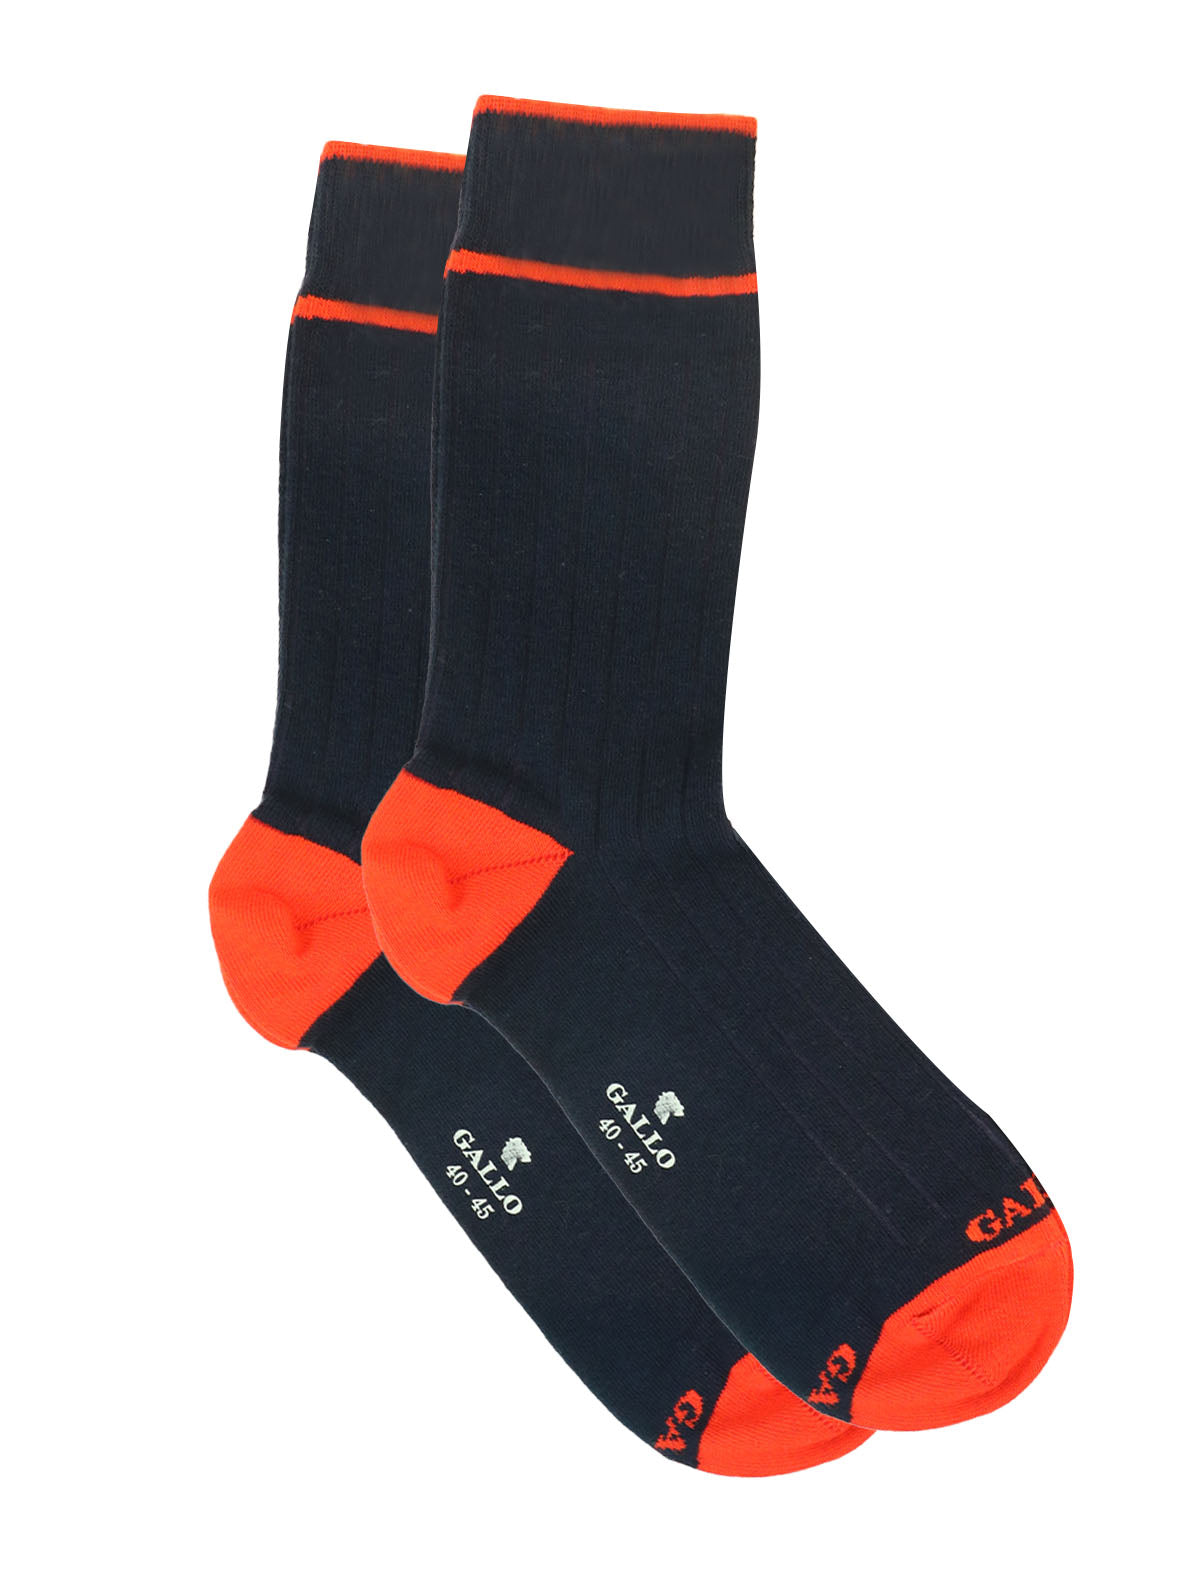 Gallo Socks in Navy Pinstripes w/ Red Contrast